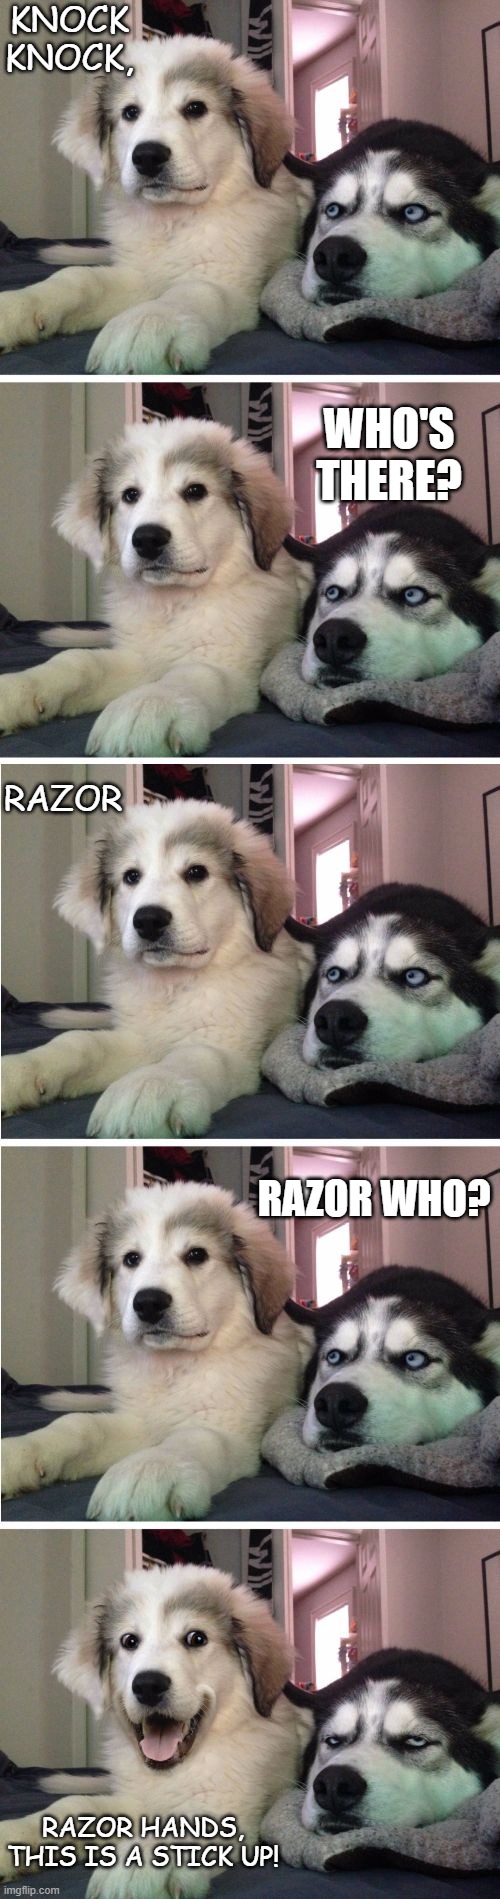 Daily Bad Dad Joke June 24 2020 | KNOCK KNOCK, WHO'S THERE? RAZOR; RAZOR WHO? RAZOR HANDS, THIS IS A STICK UP! | image tagged in knock knock dogs | made w/ Imgflip meme maker